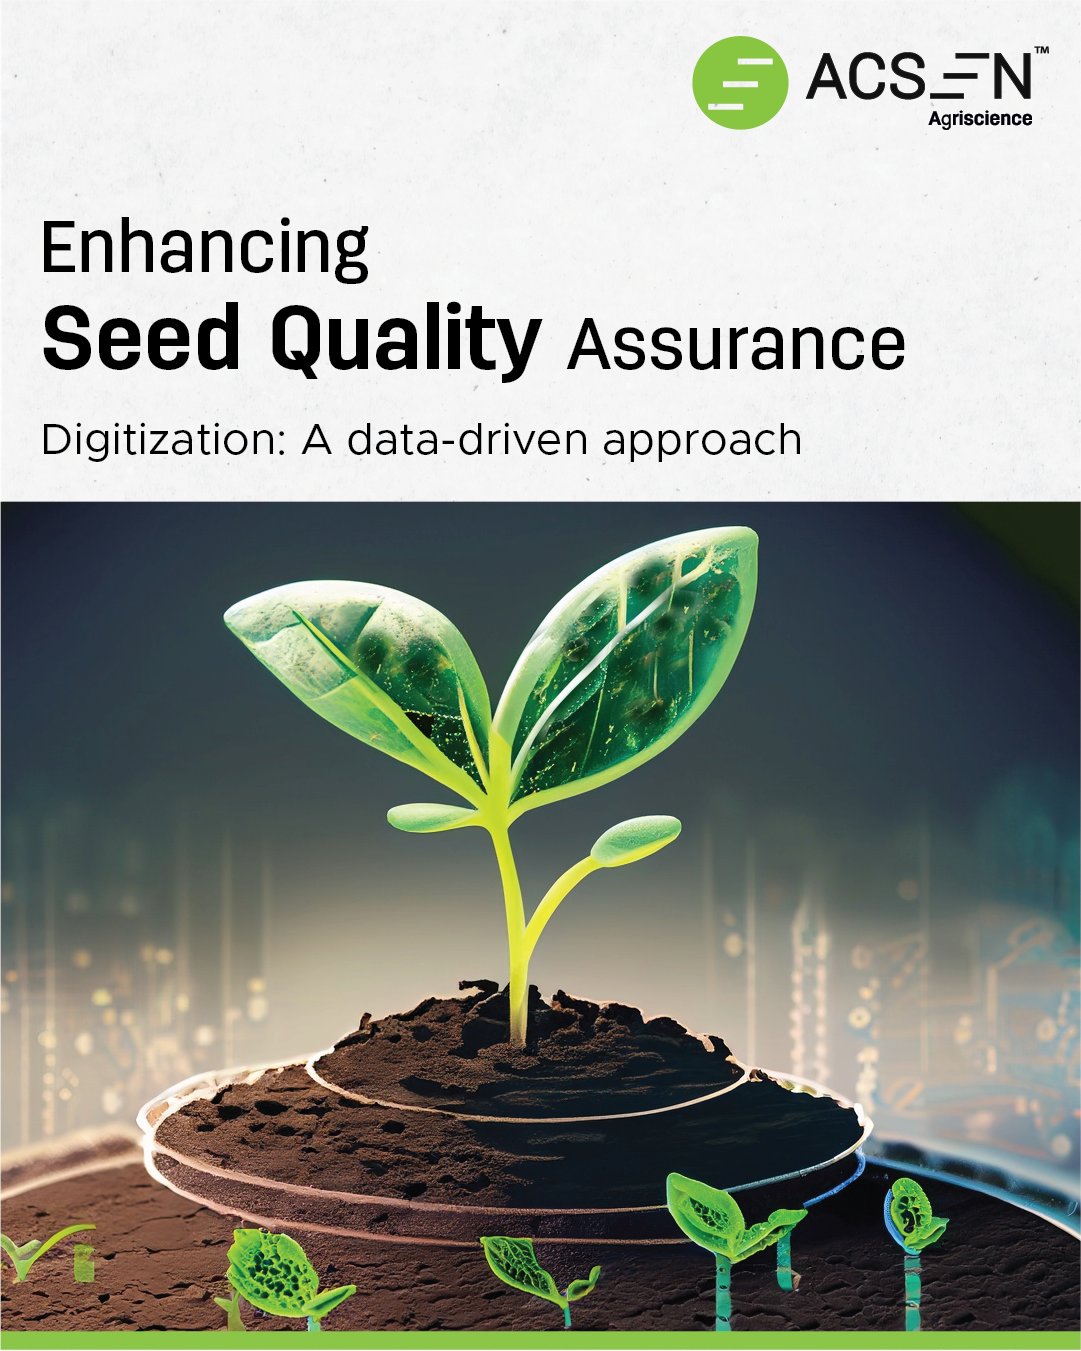 II. Importance of Seed Quality and Productivity